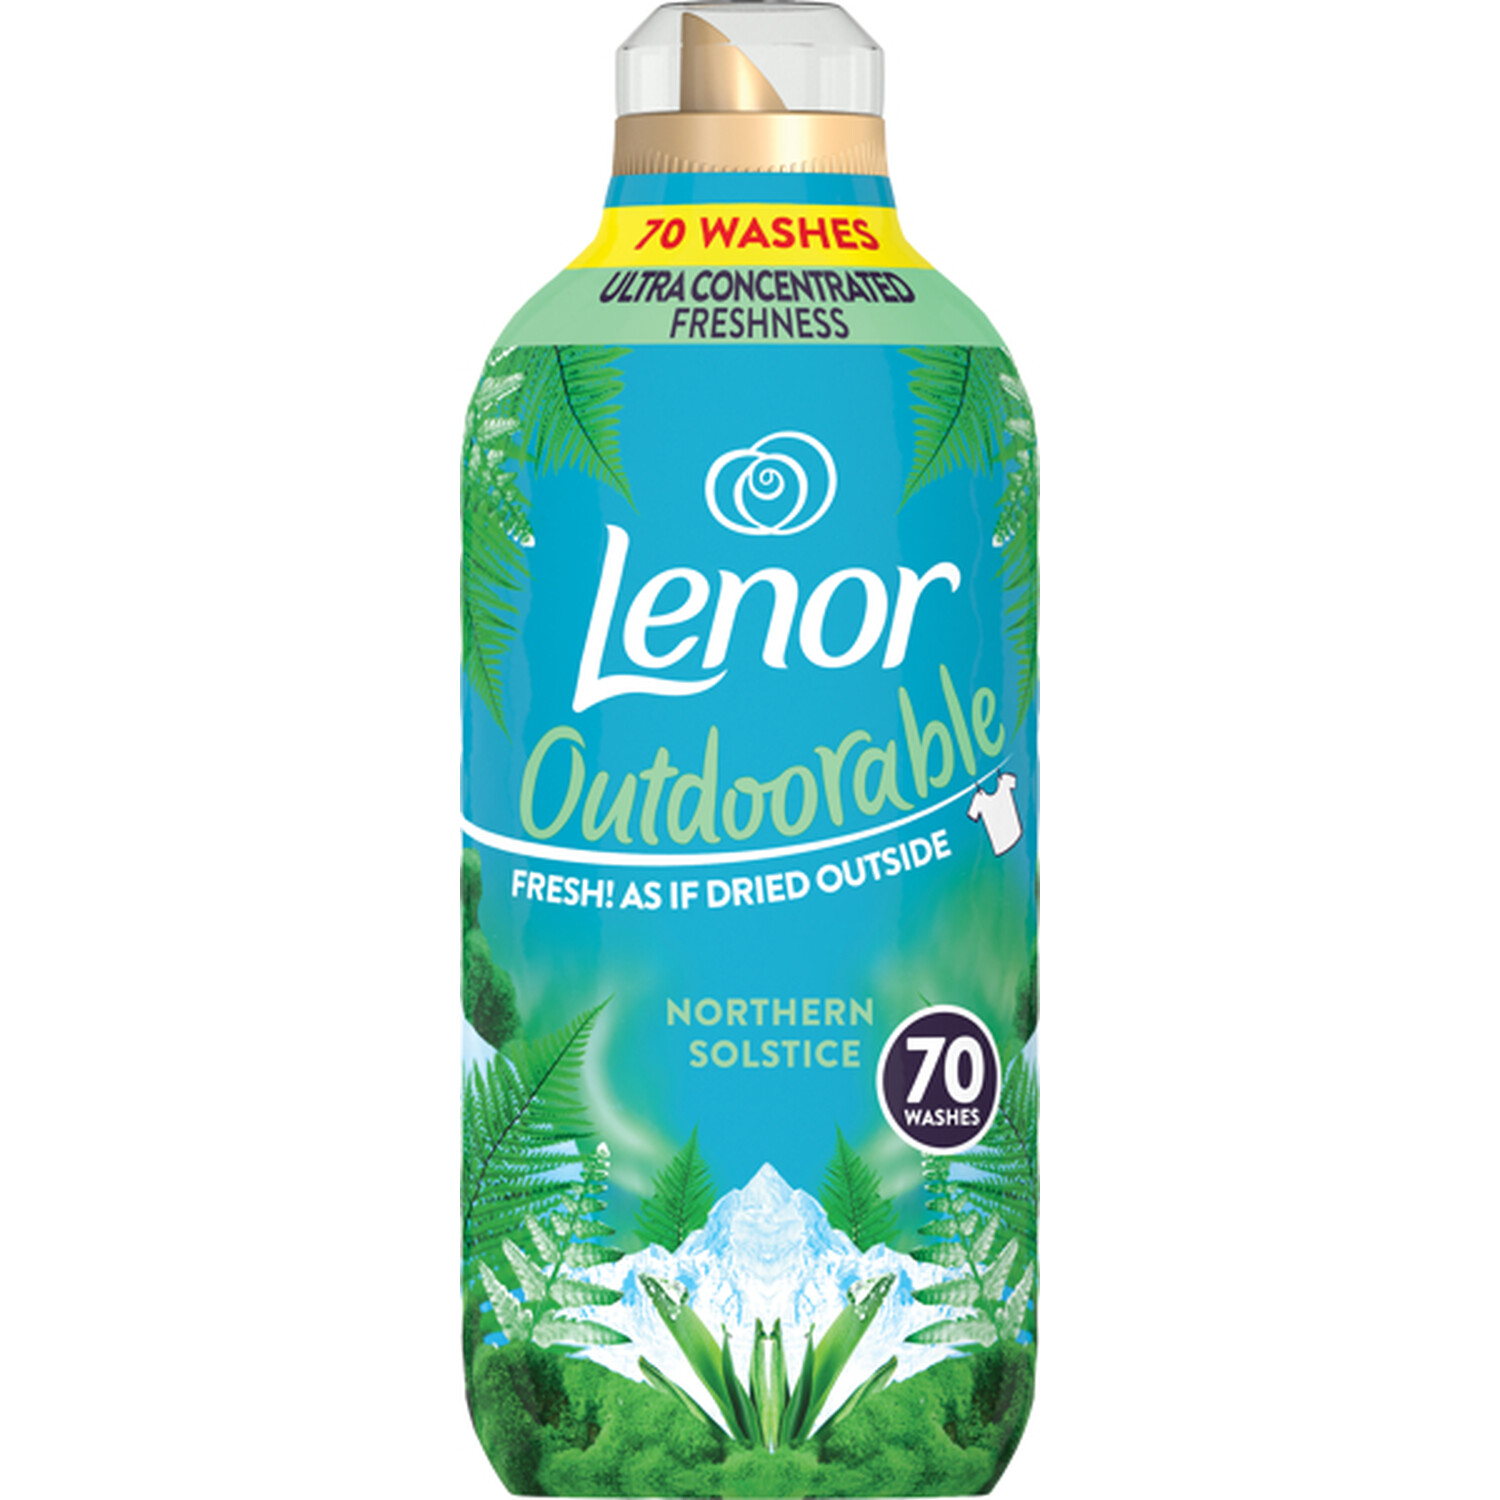 Lenor Outdoorable Fabric Conditioner - Northern Solstice / 70 Image 1